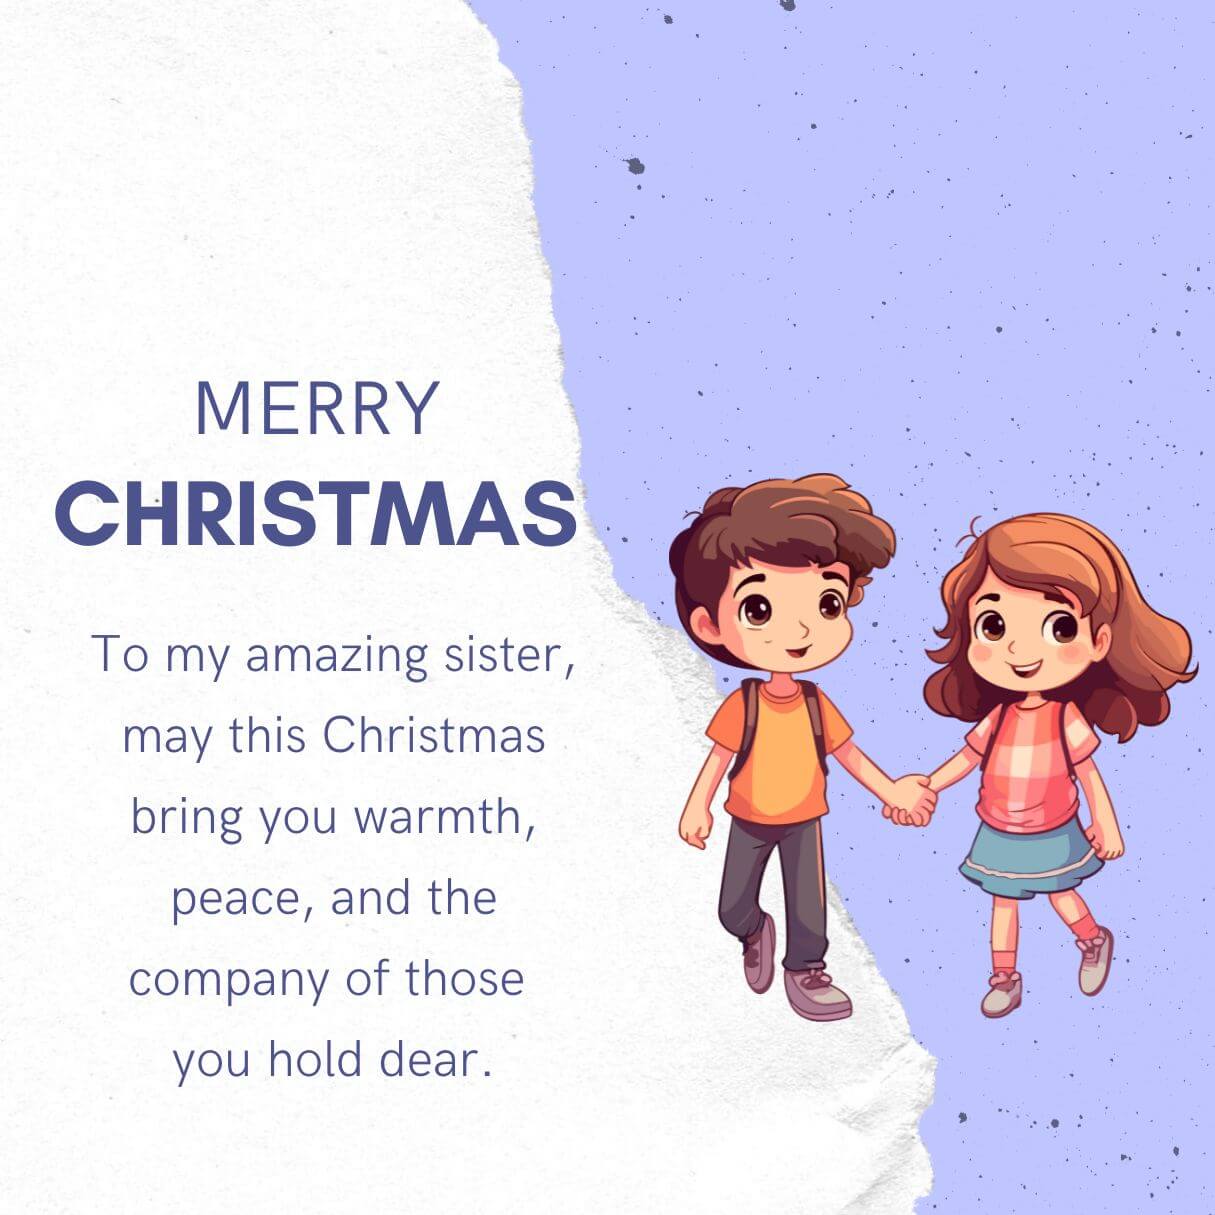 Merry Christmas Messages For Amazing Sister